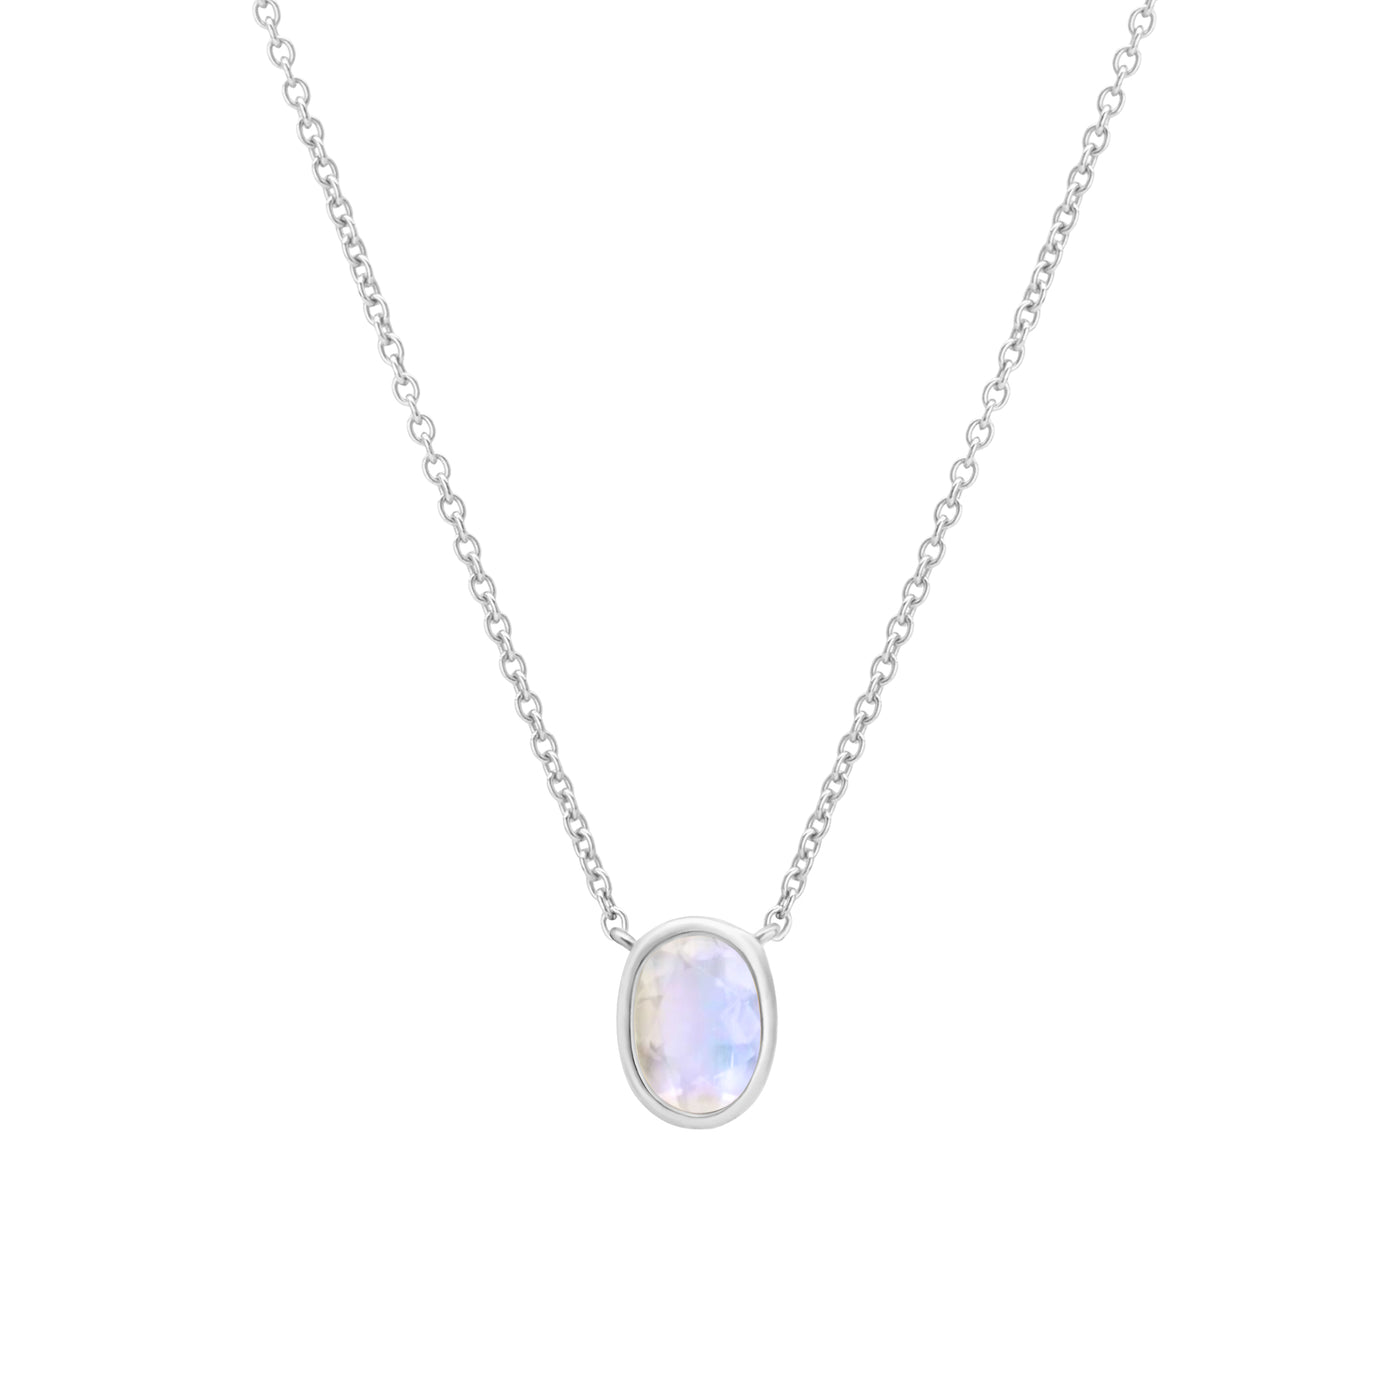 14 Karat White Gold Necklace with Oval Shaped Moonstone Stone Against White Background